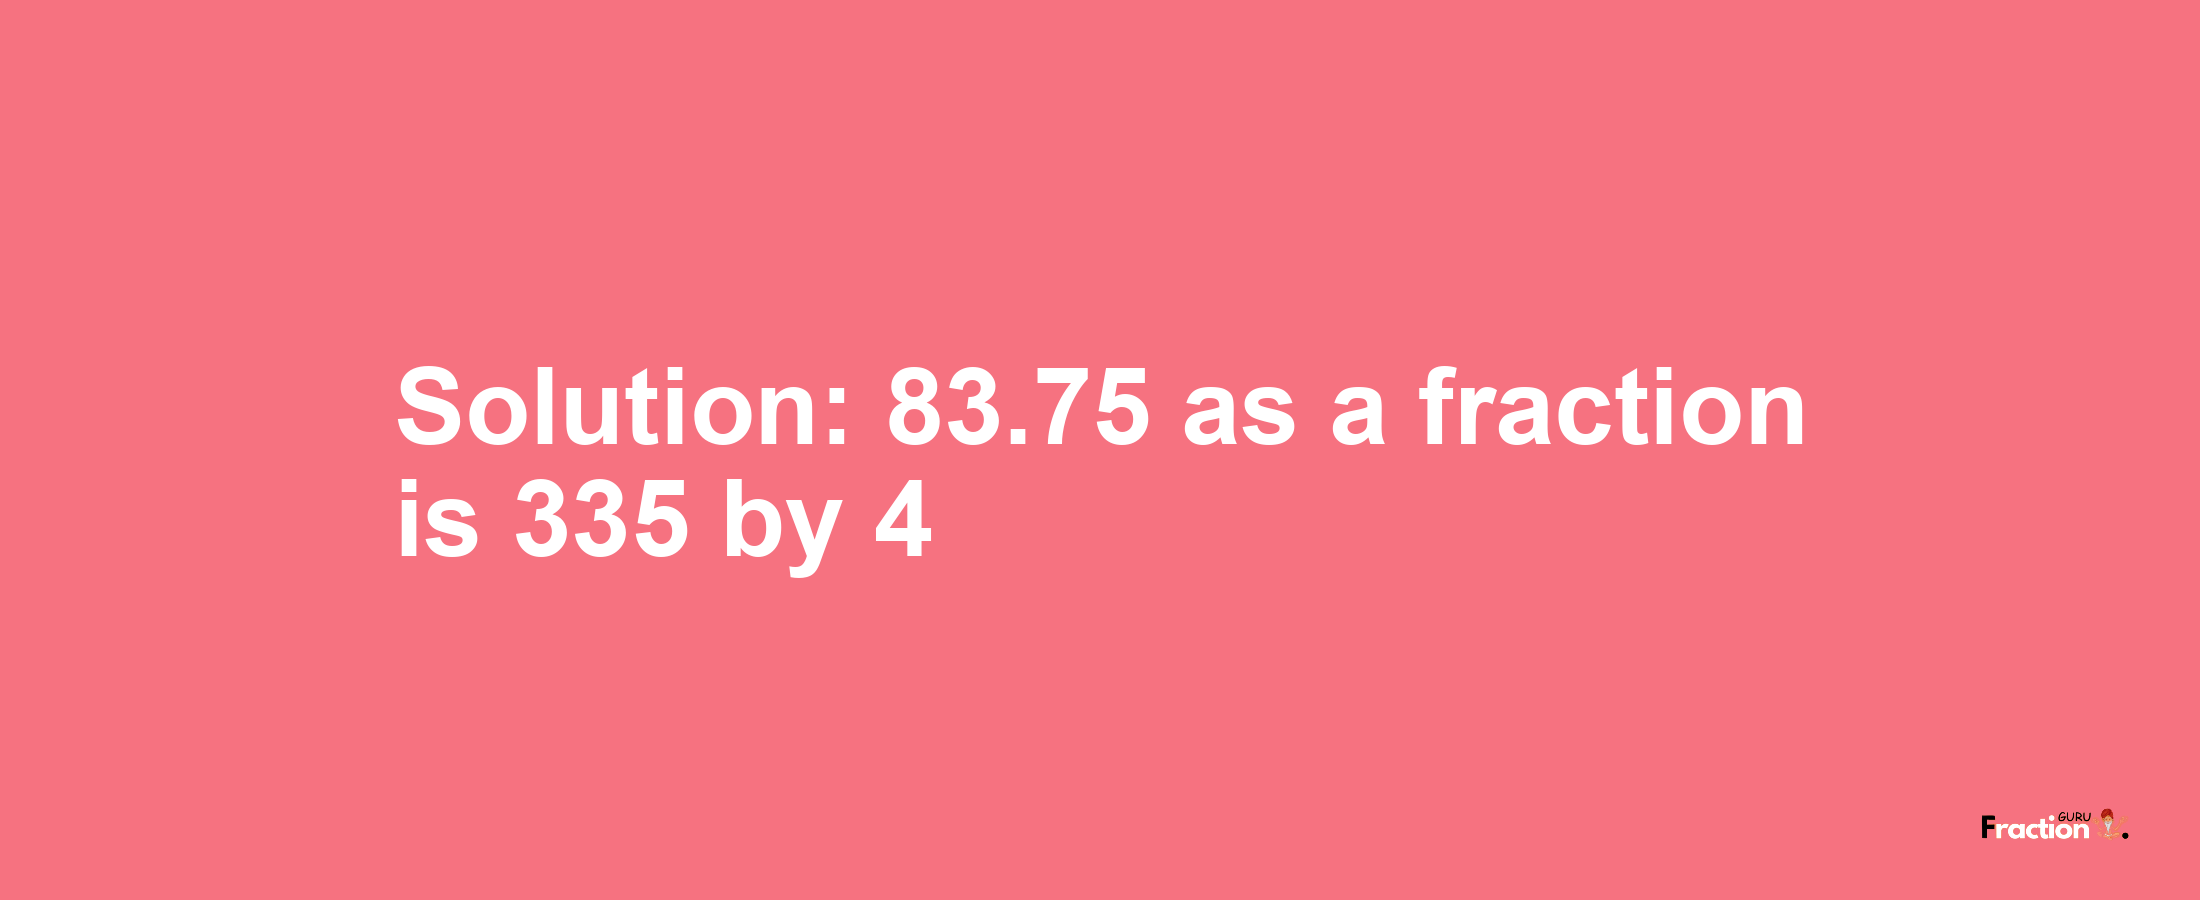 Solution:83.75 as a fraction is 335/4